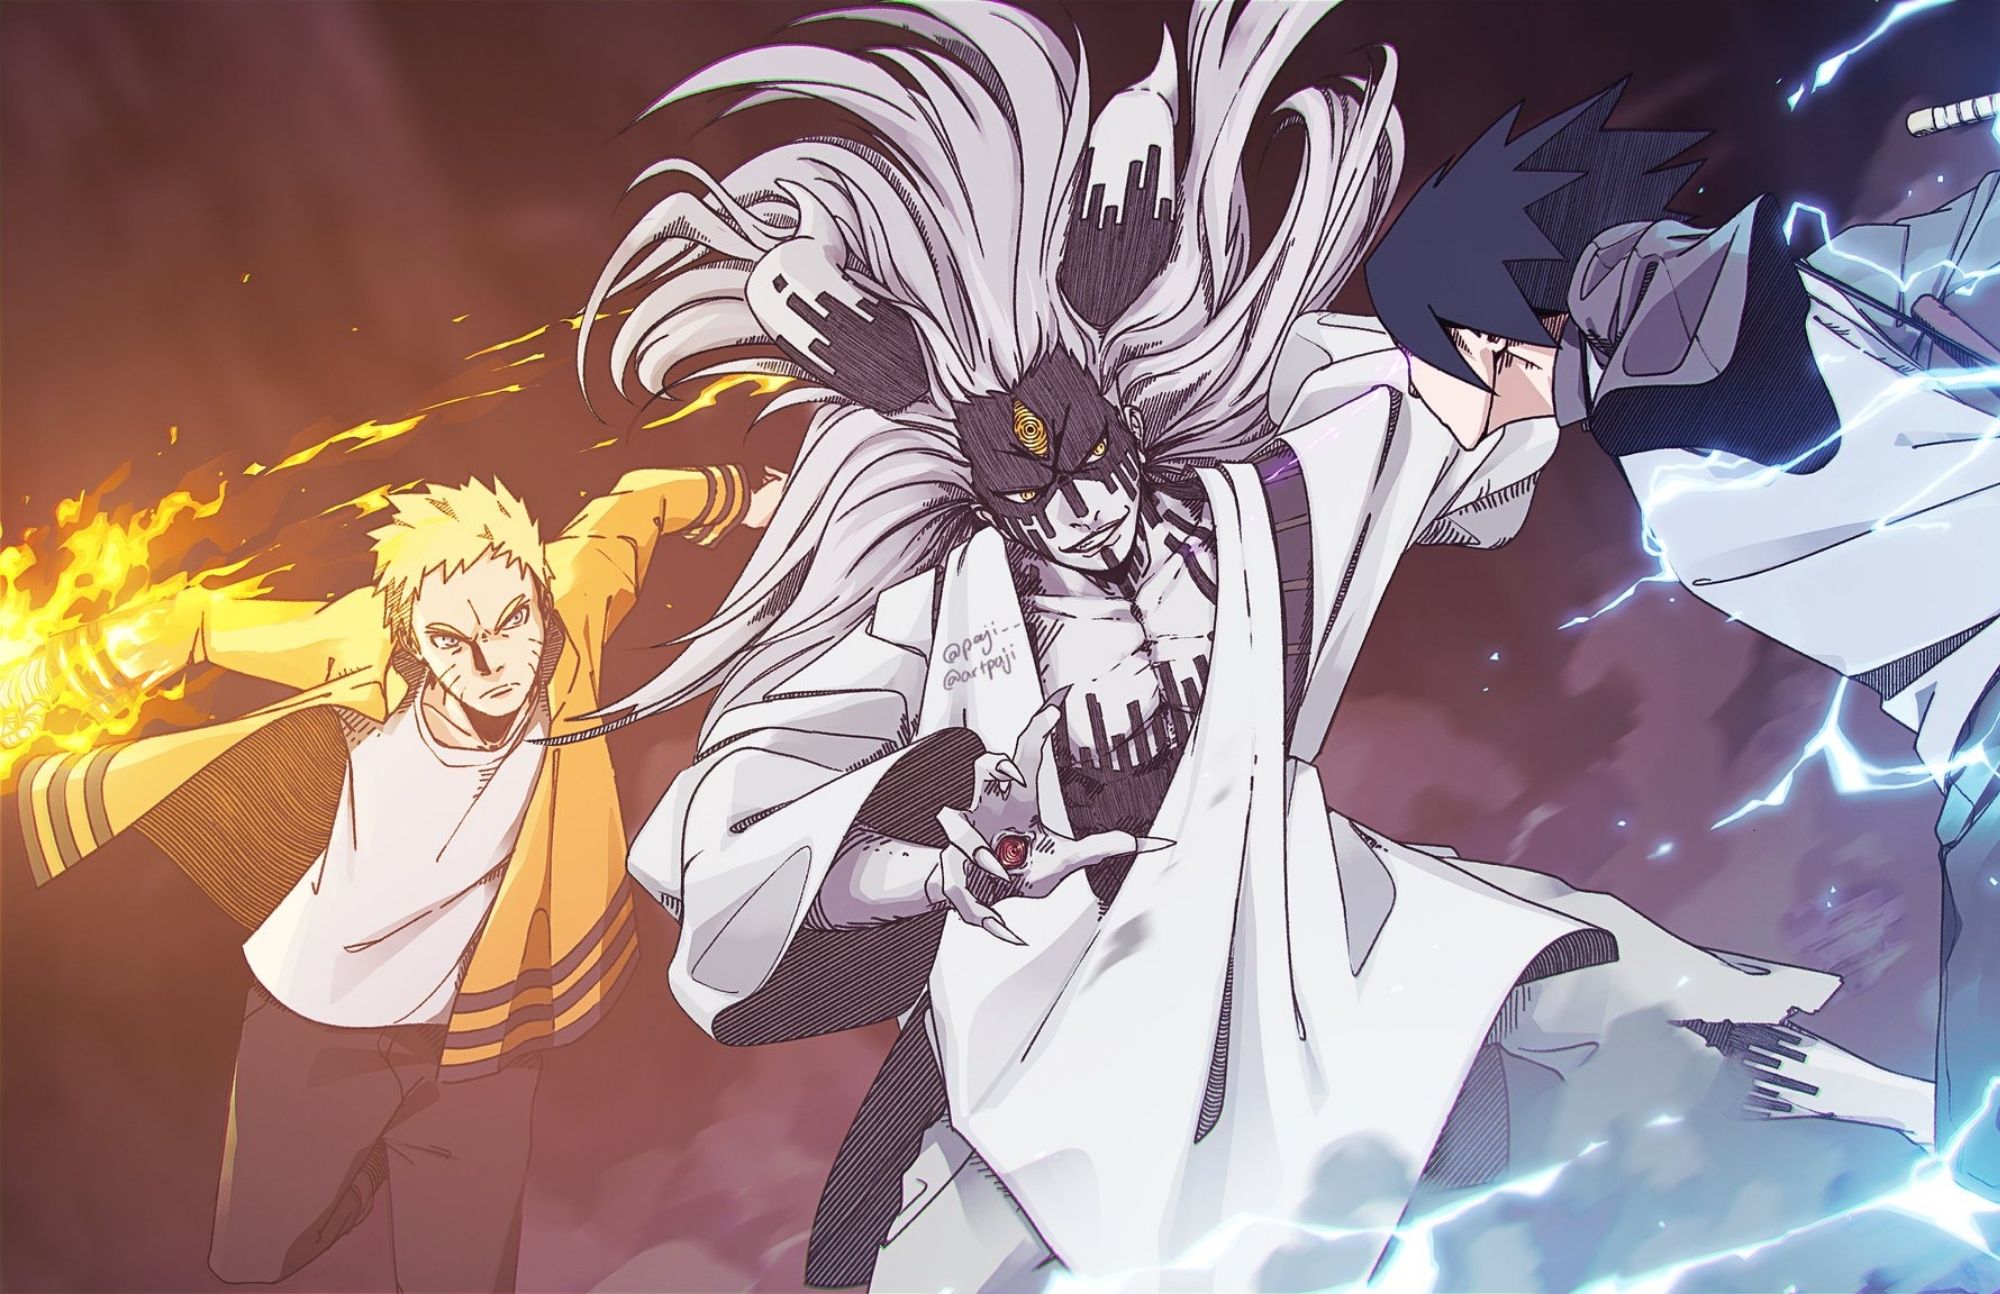 Naruto, who has flames on his hands, and Sasuke, who has electric powers, fight a man named Otsutsuki god in the middle